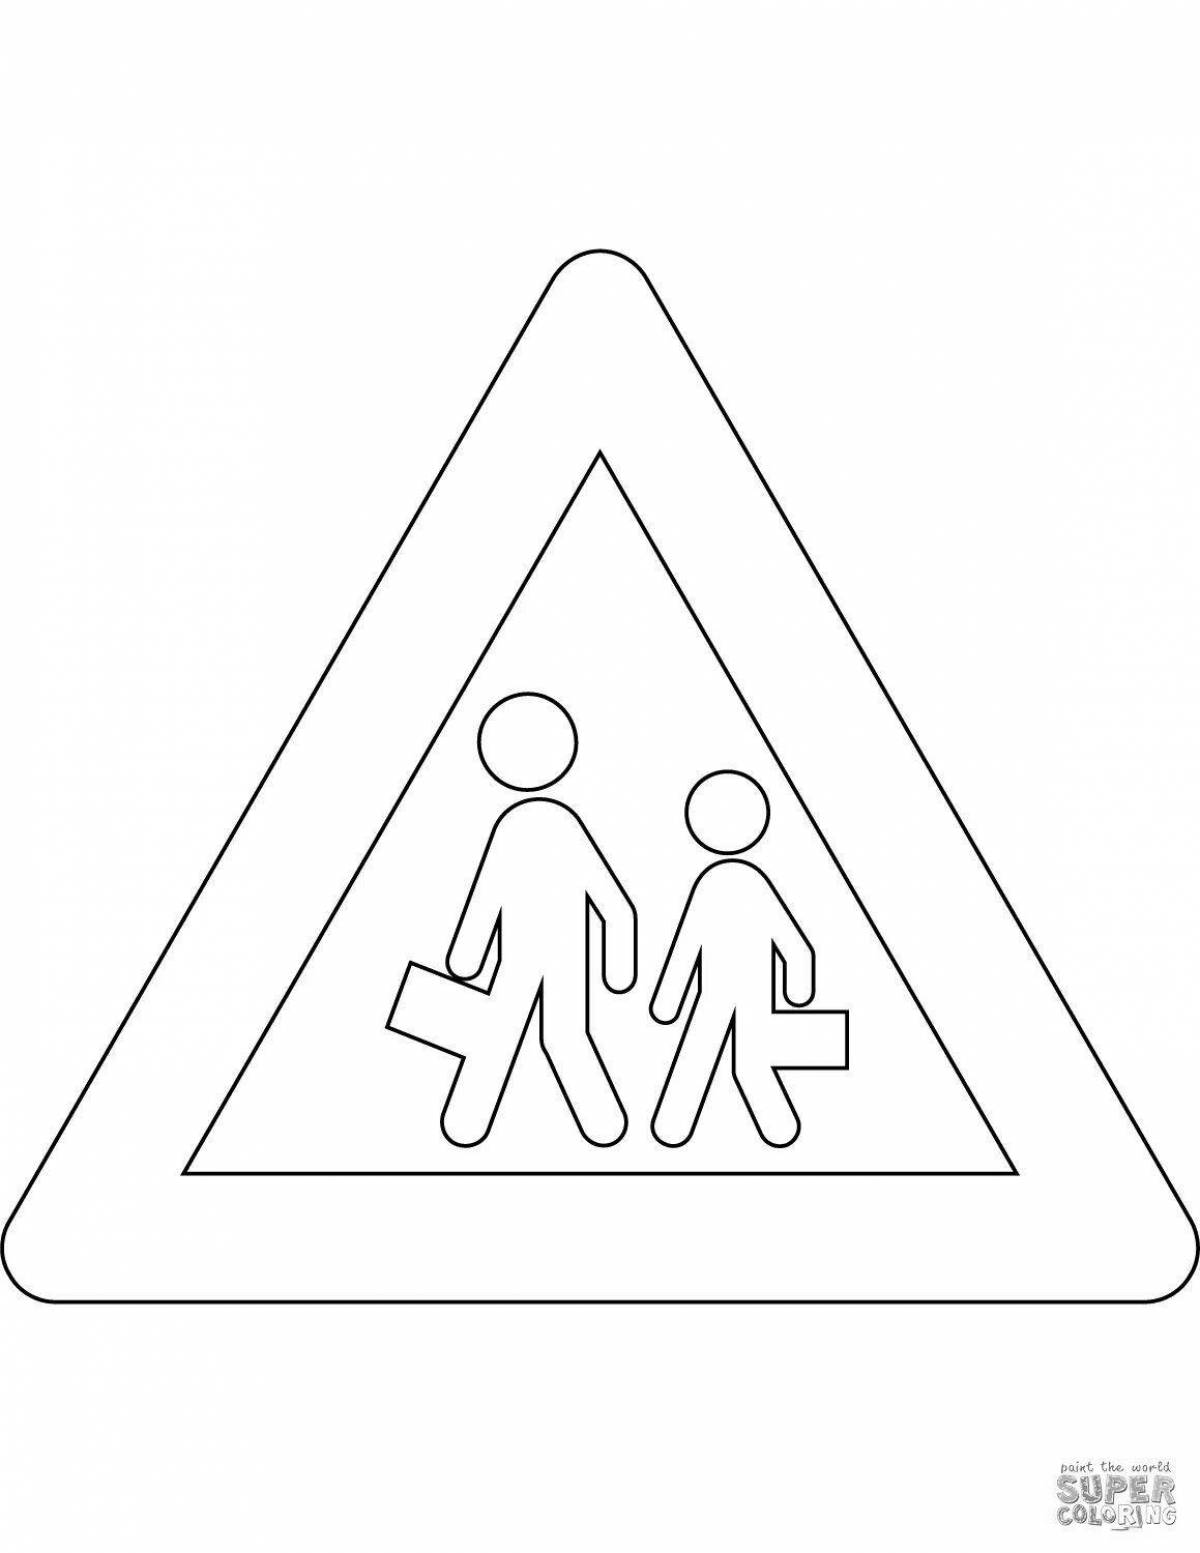 Coloring page cheerful traffic sign grade 3